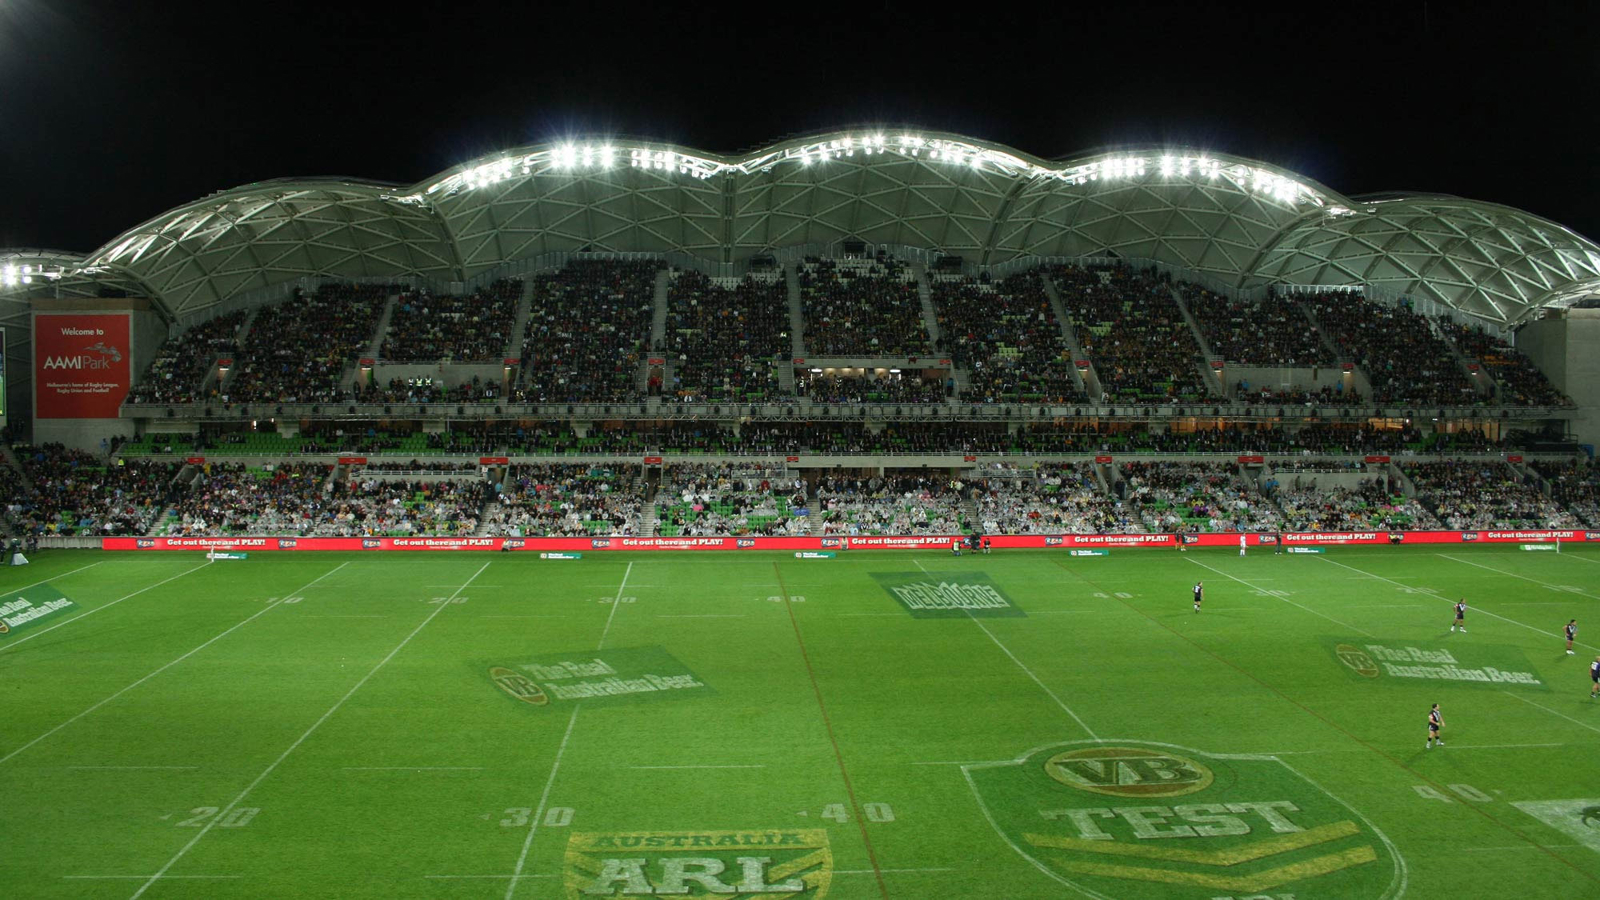 View from the stands of AAMI Park